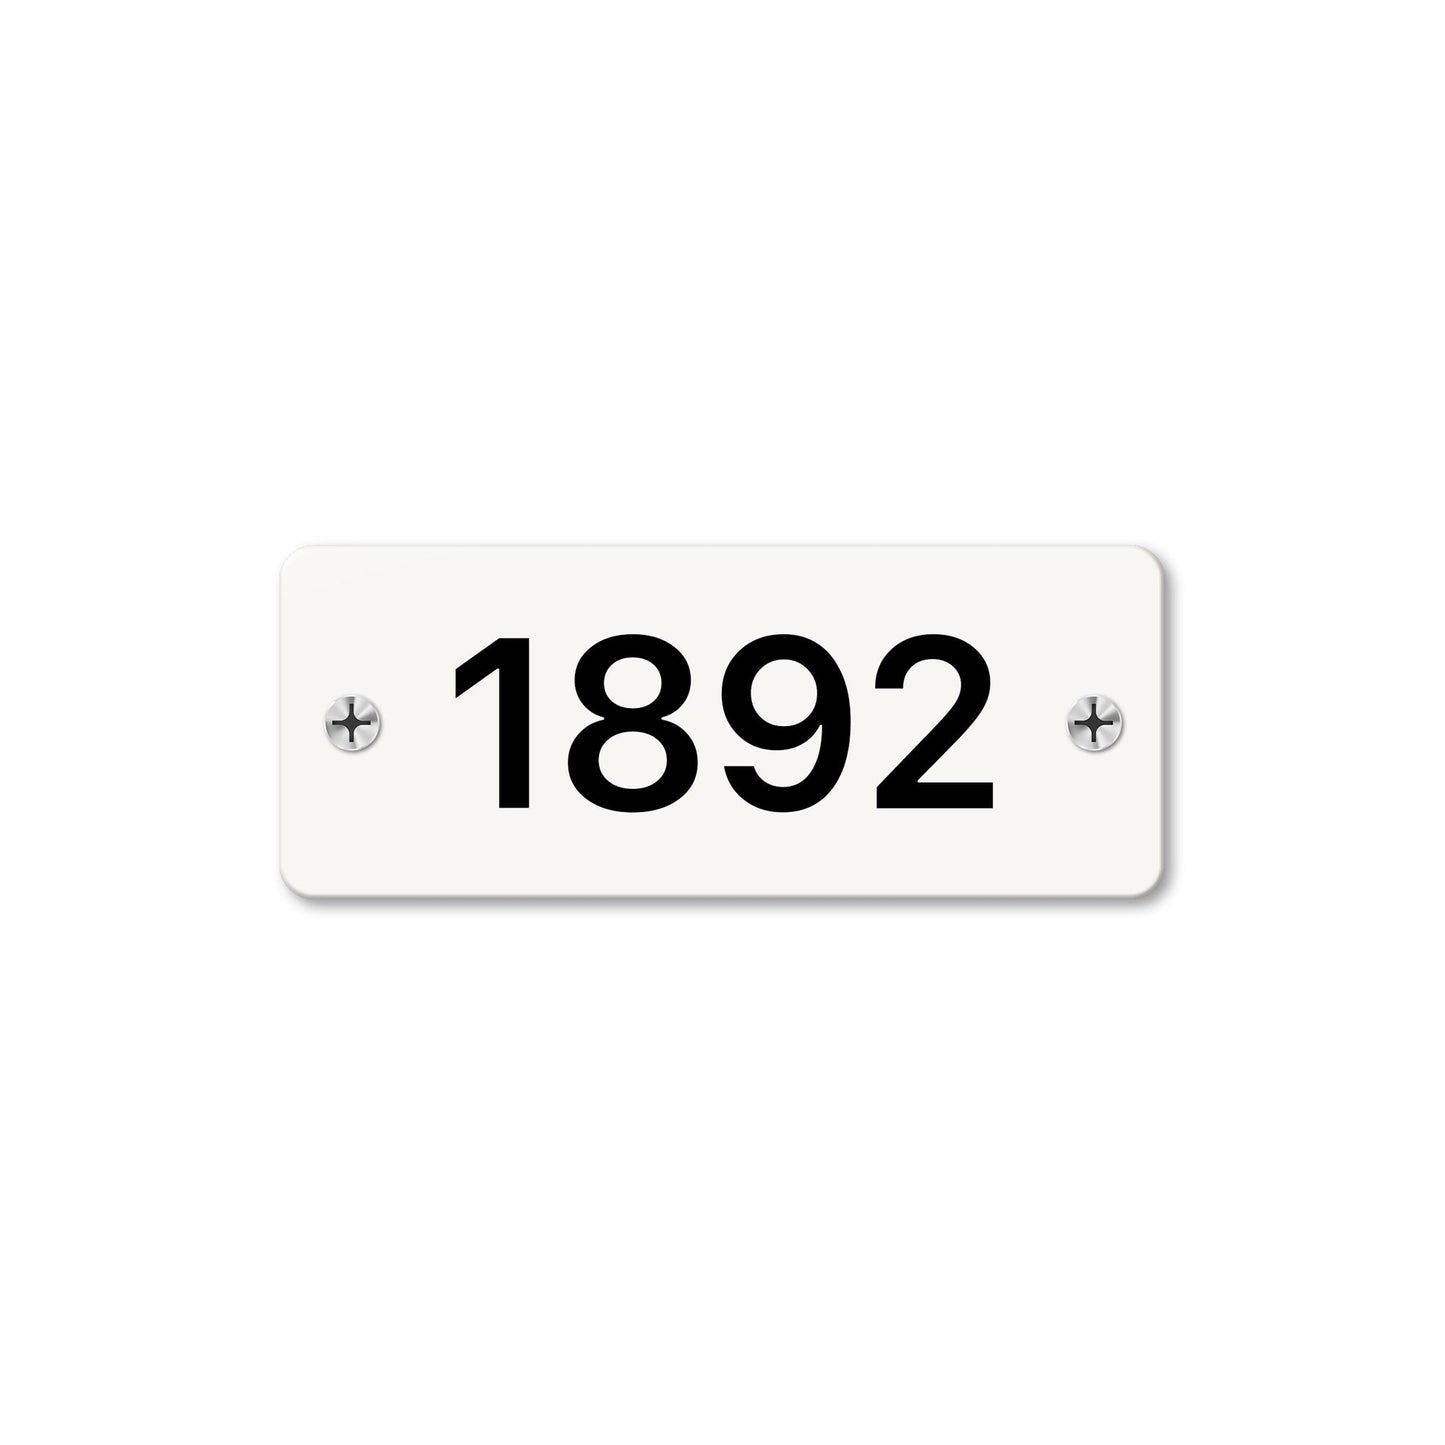 Numeral 1892